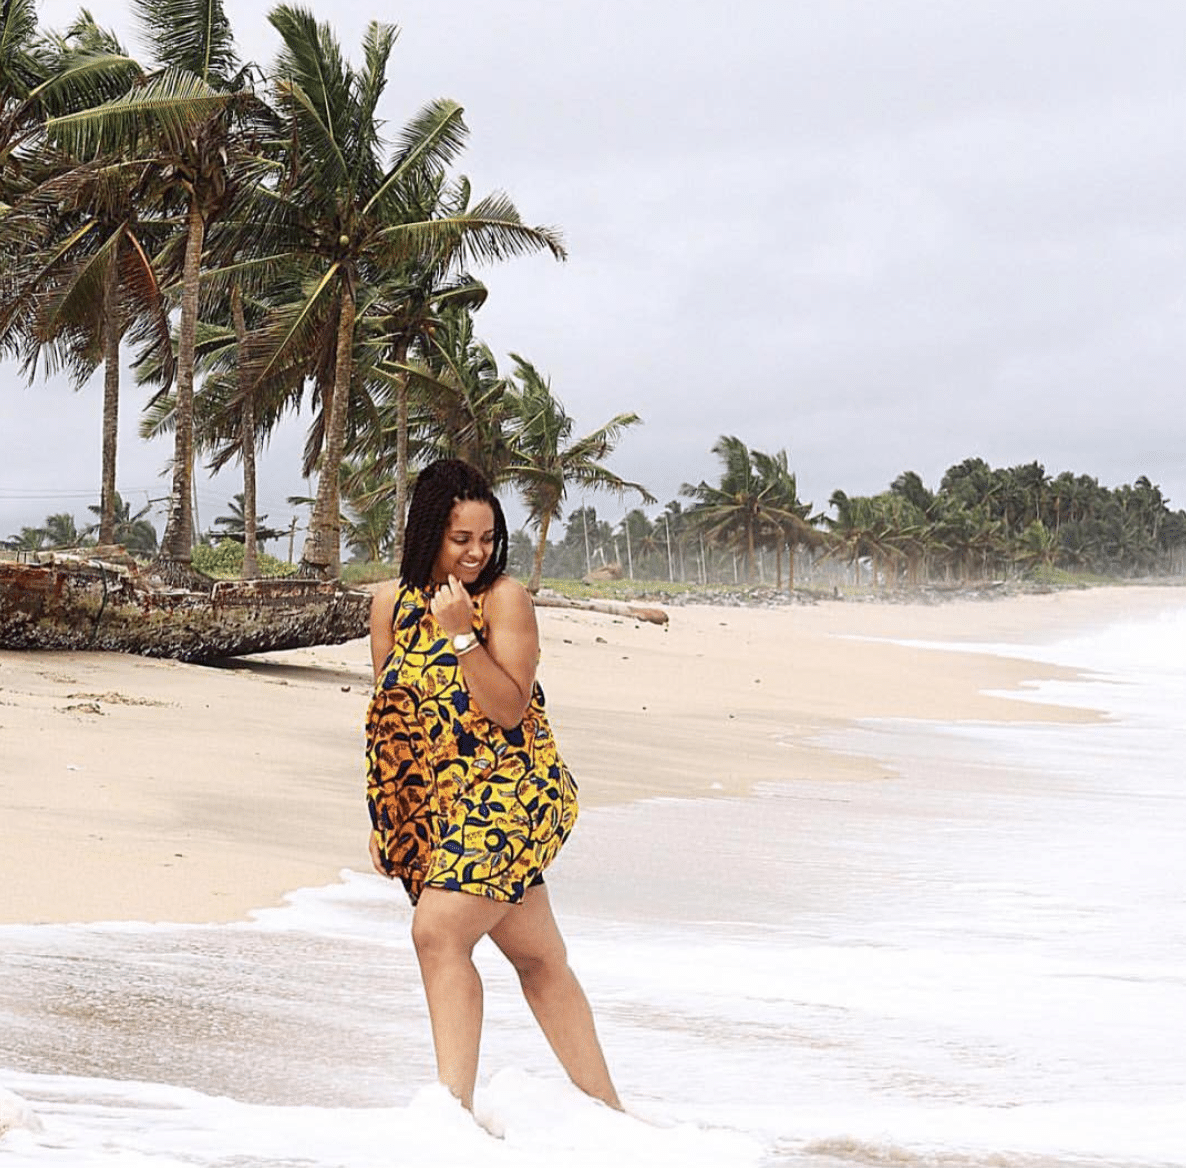 10 Times Black Travelers Showed Us The Resilience and Beauty of Ghana